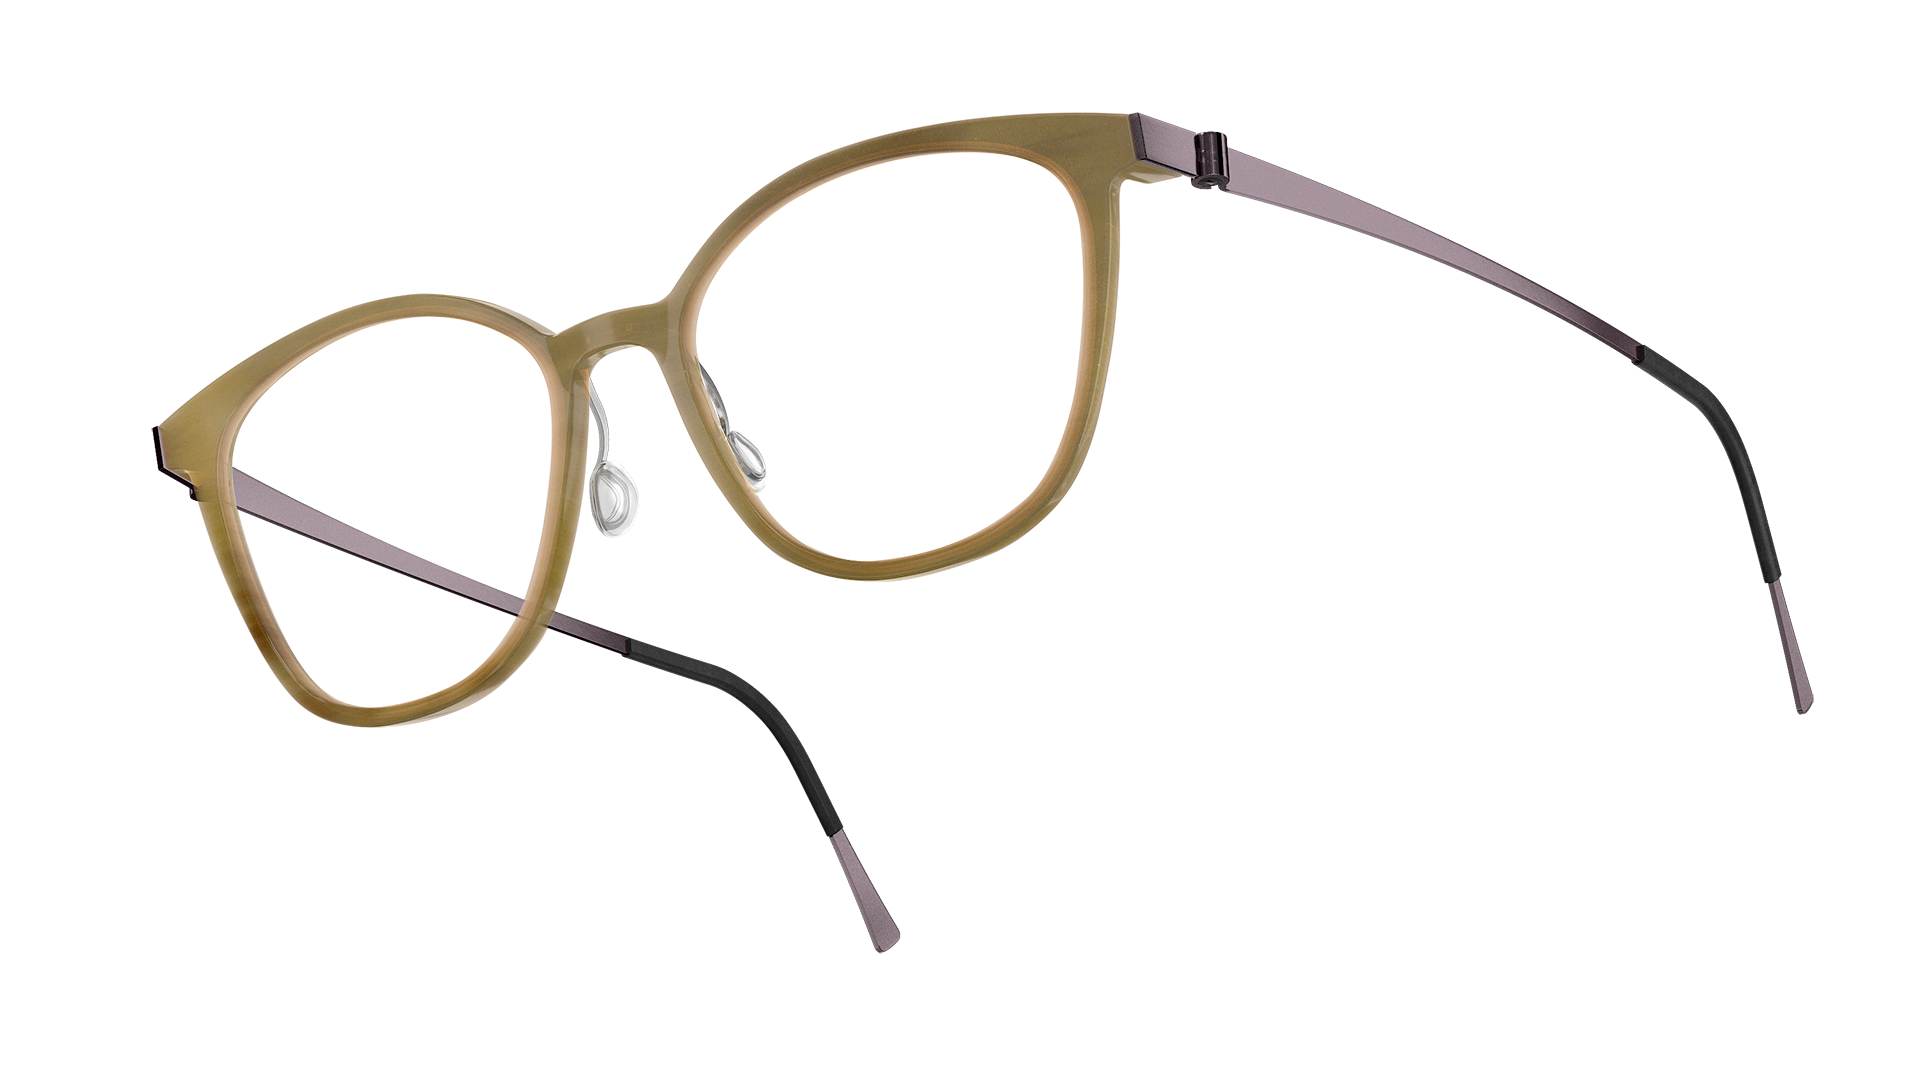 LINDBERG buffalo model 1851 in H16 light brown horn glasses with PU14 titanium temples